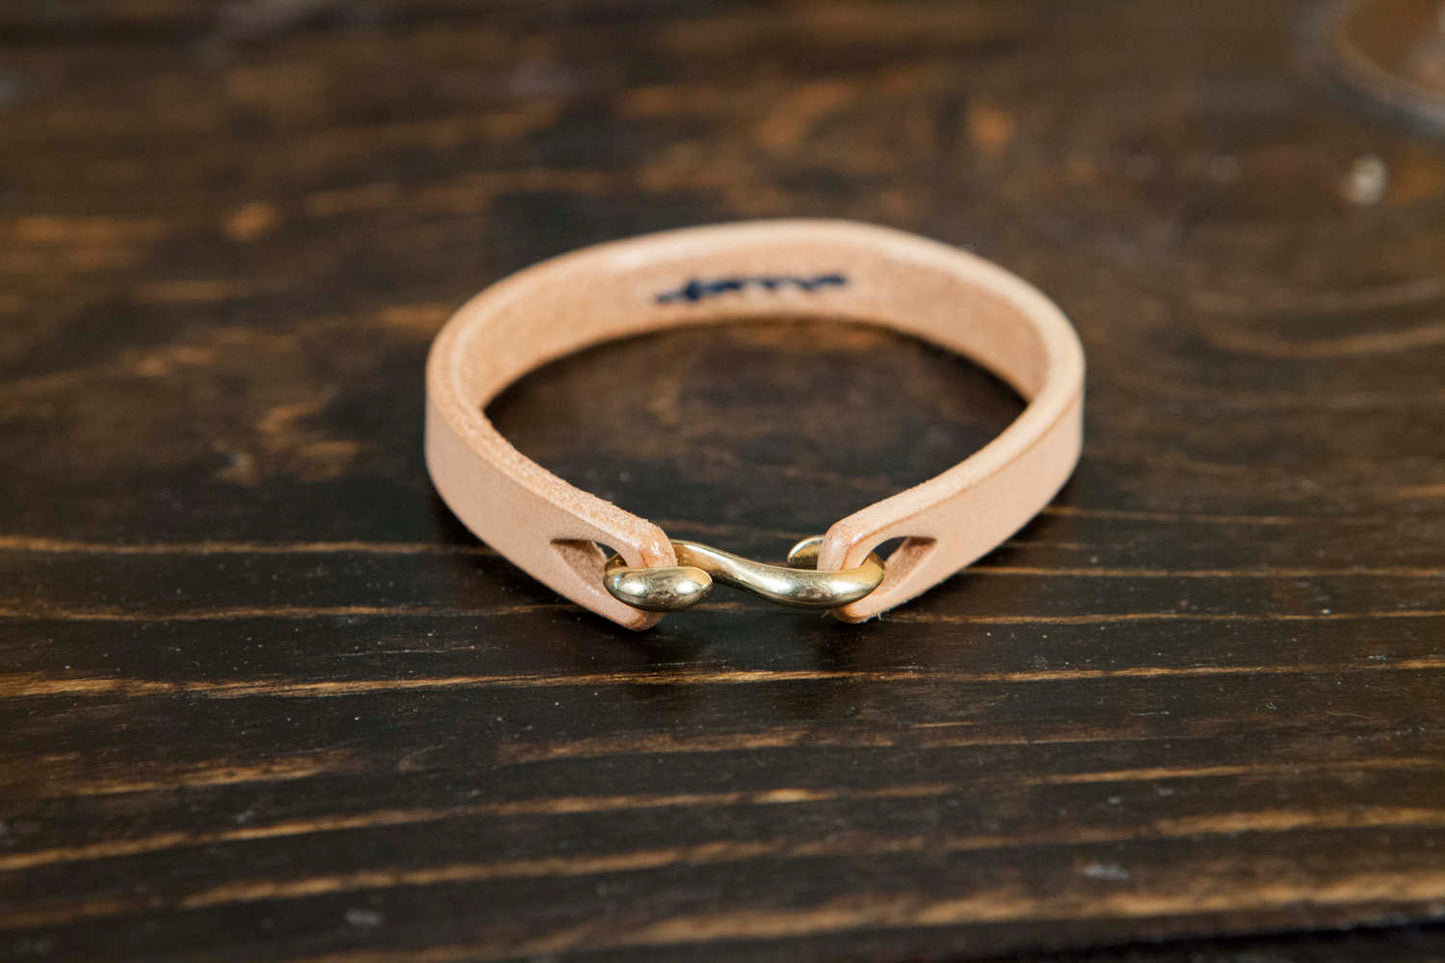 Natural Vegetable Tanned Leather Cuff with Indigo Stitching - Solid Brass or Copper S Clasp